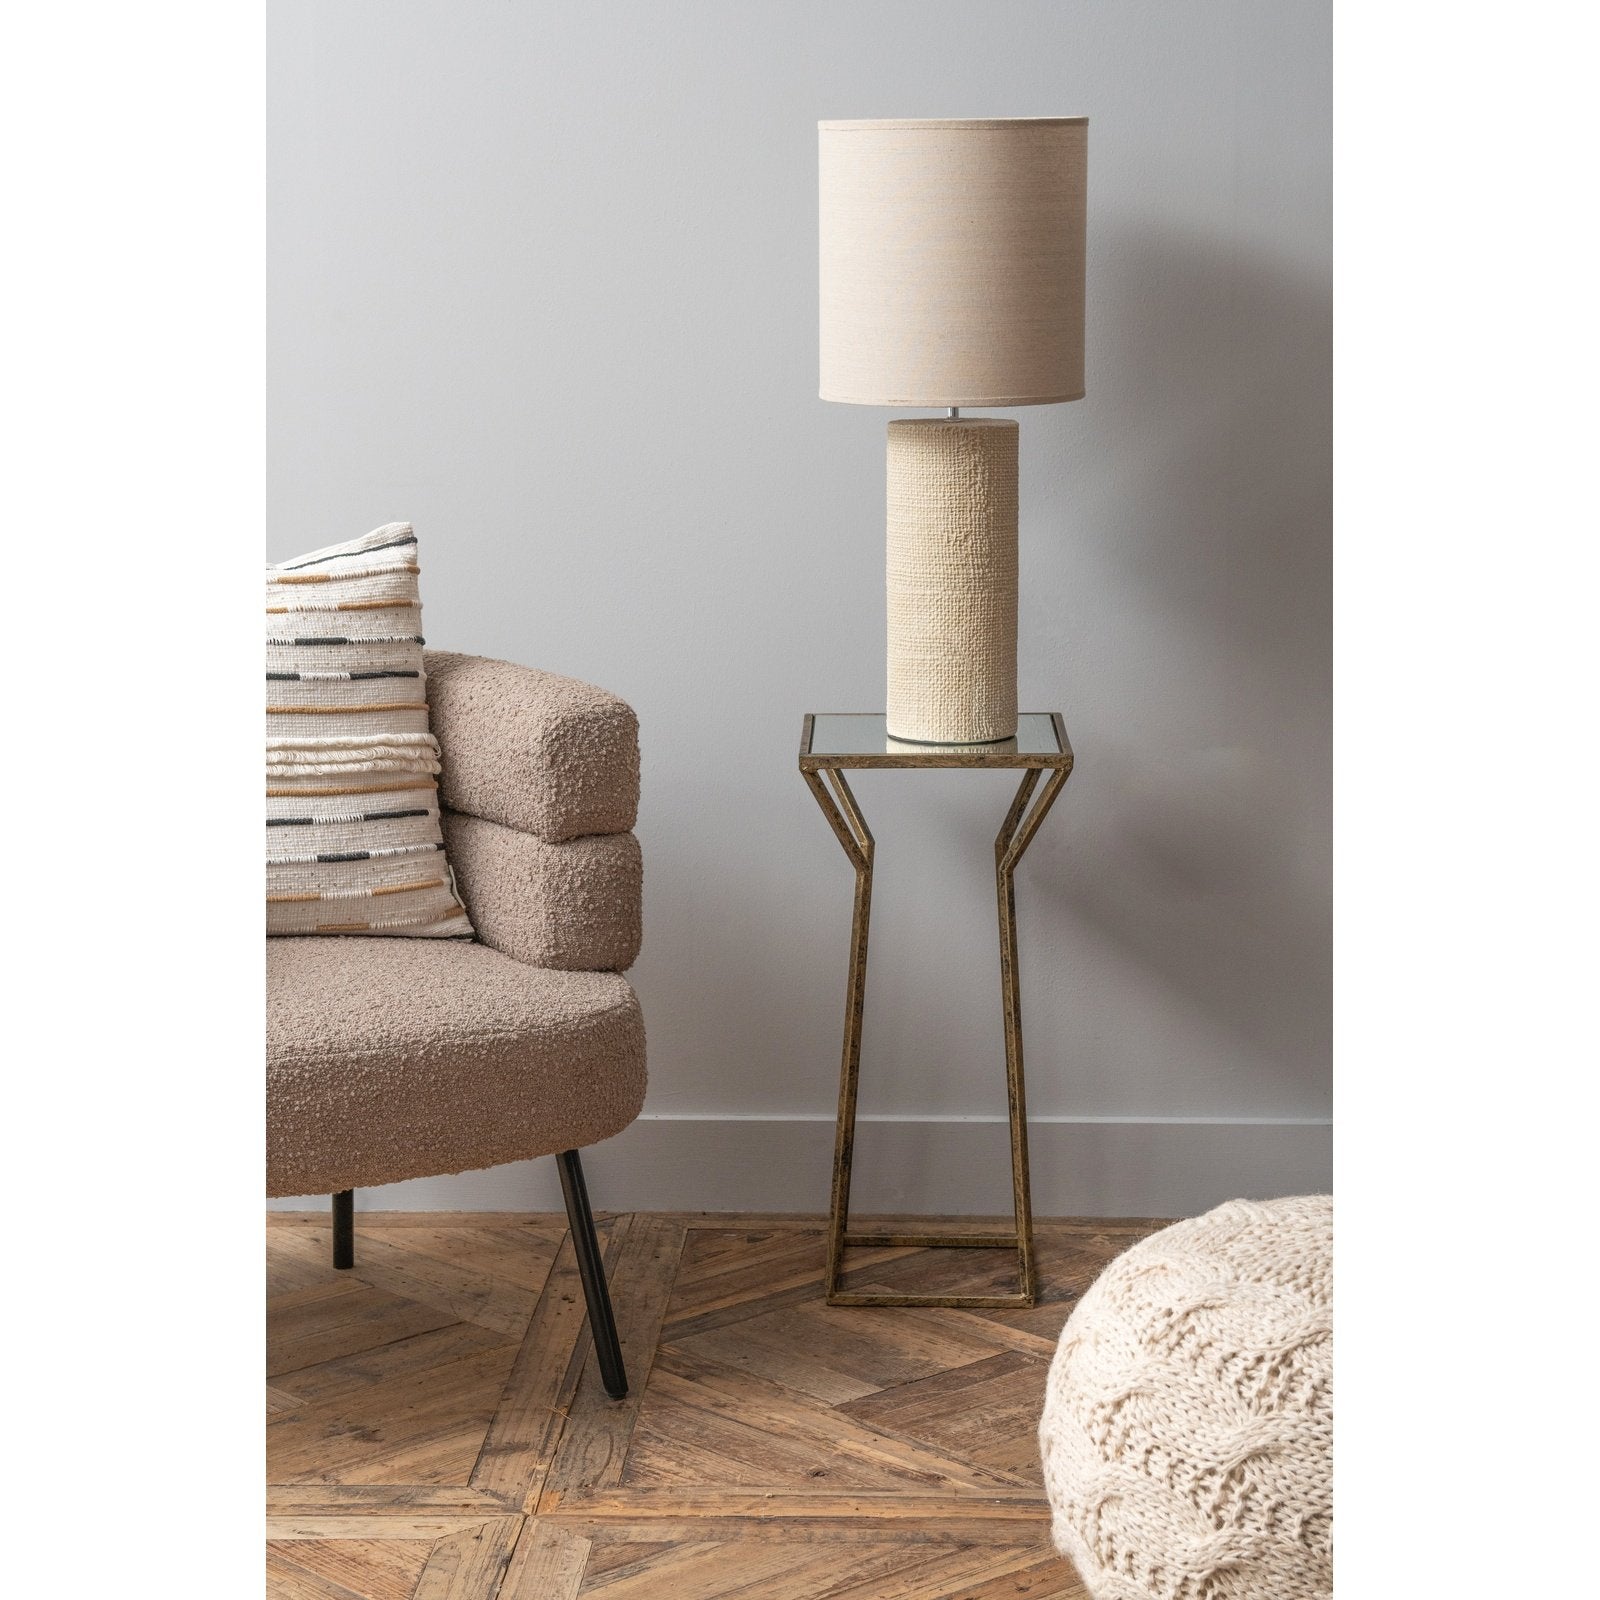 Tall Cream Textured Porcelain Table Lamp With Shade  E27 60W